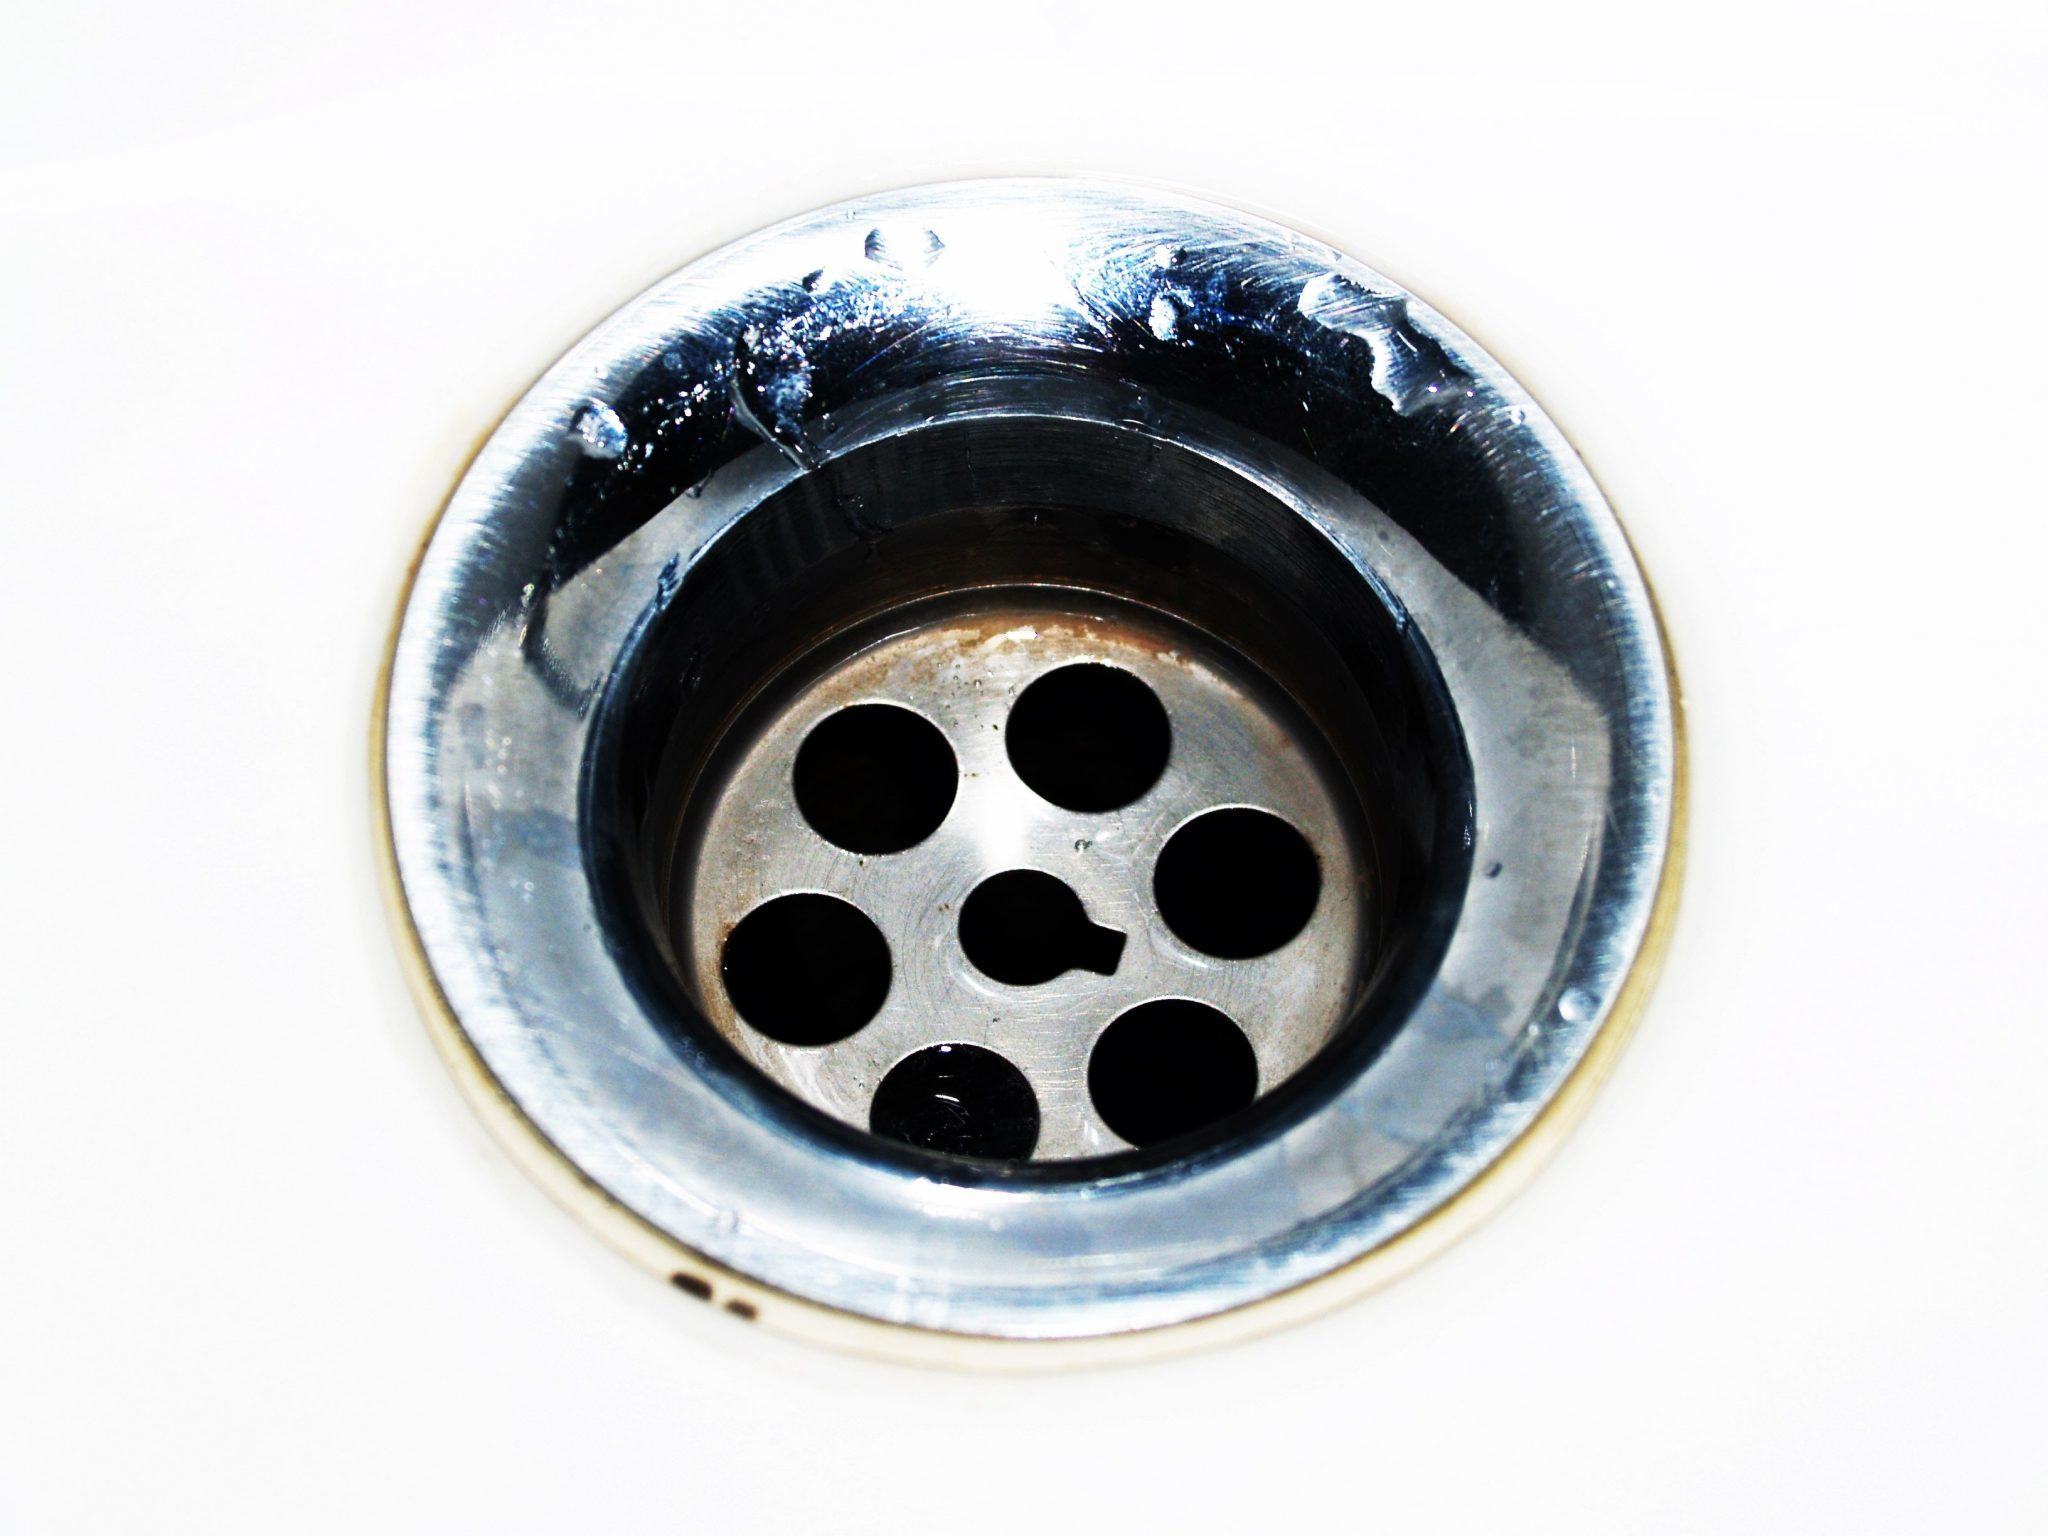 Why Are There Fruit Flies In My Drain? - Mr. Plumber